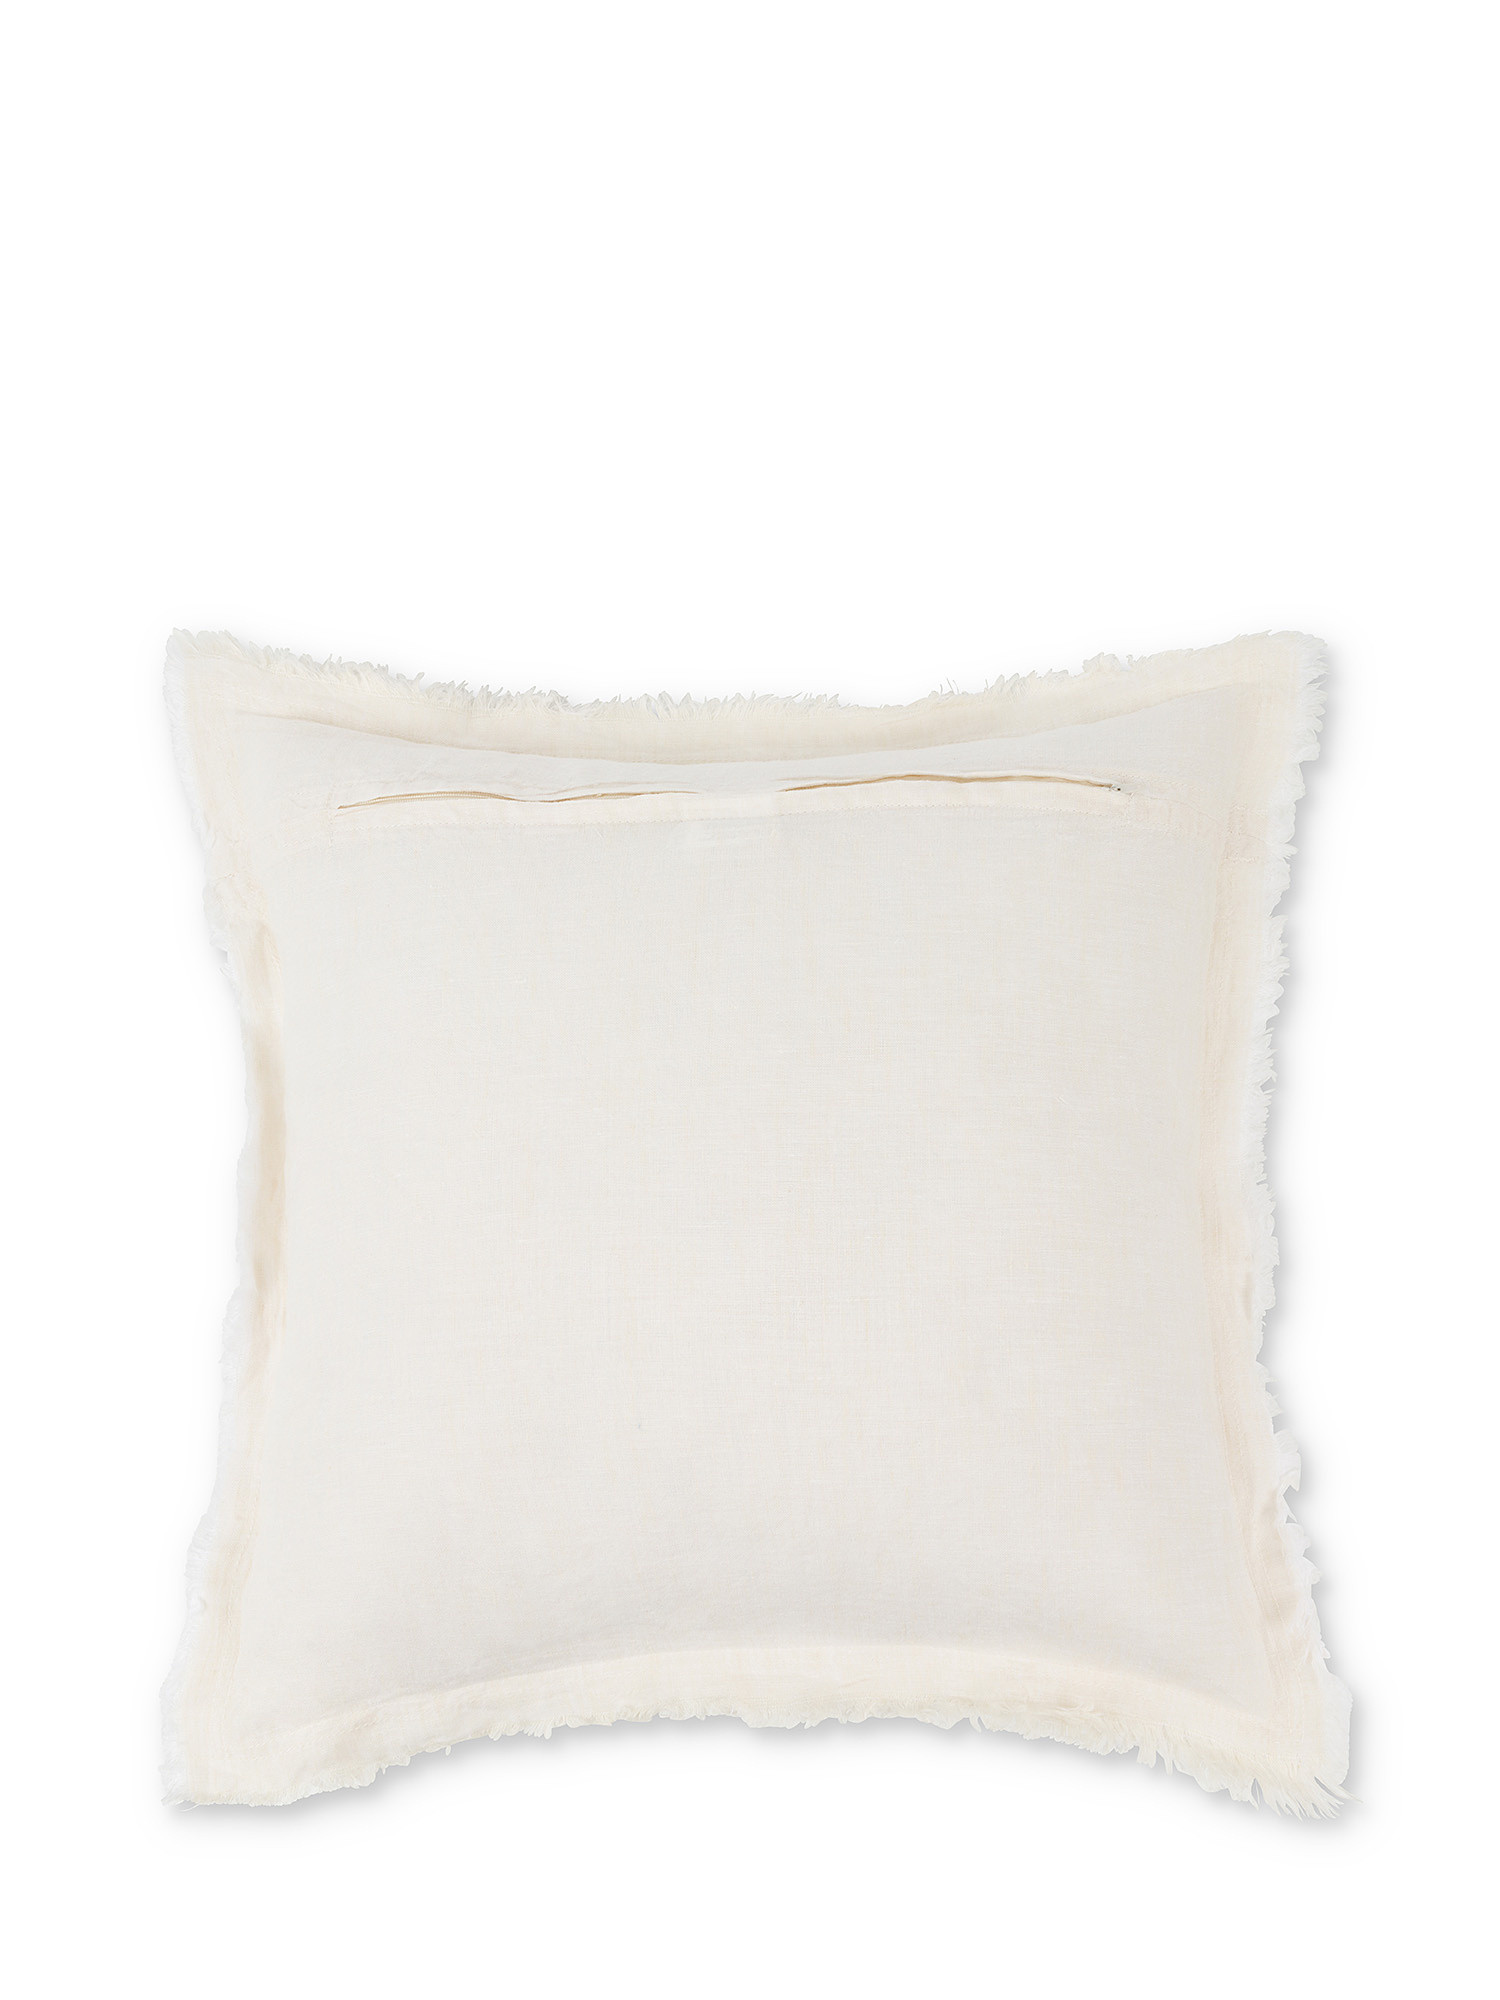 Solid color 100% linen cushion 45x45cm, White, large image number 1